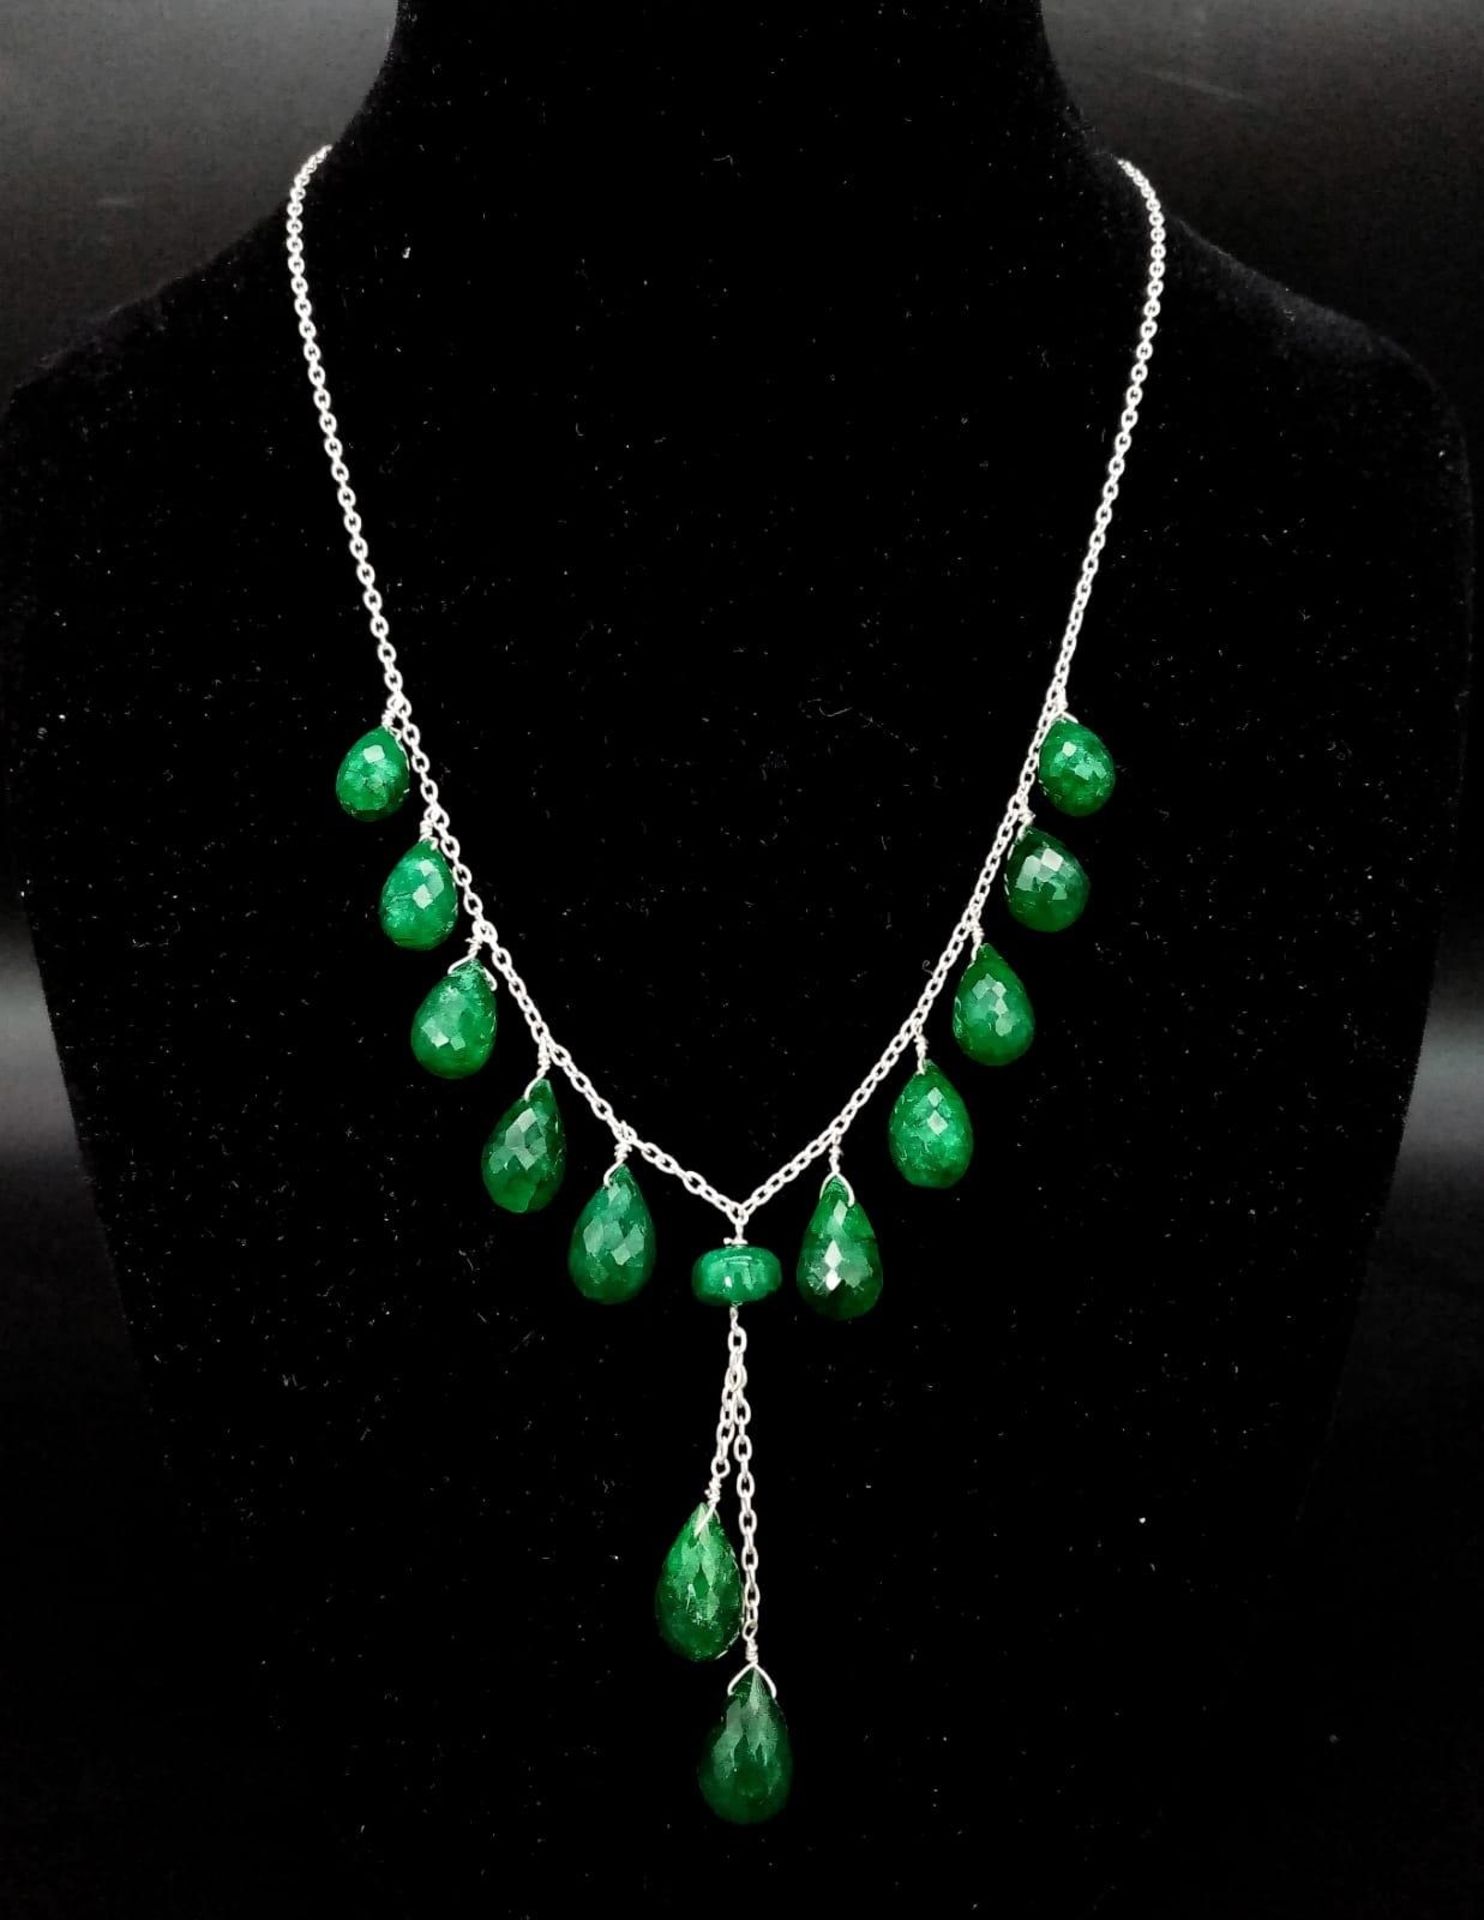 A 925 Silver Necklace with Briolite Cut Emerald Drops. 44cm in length, 5.5cm middle drop, 77ctw